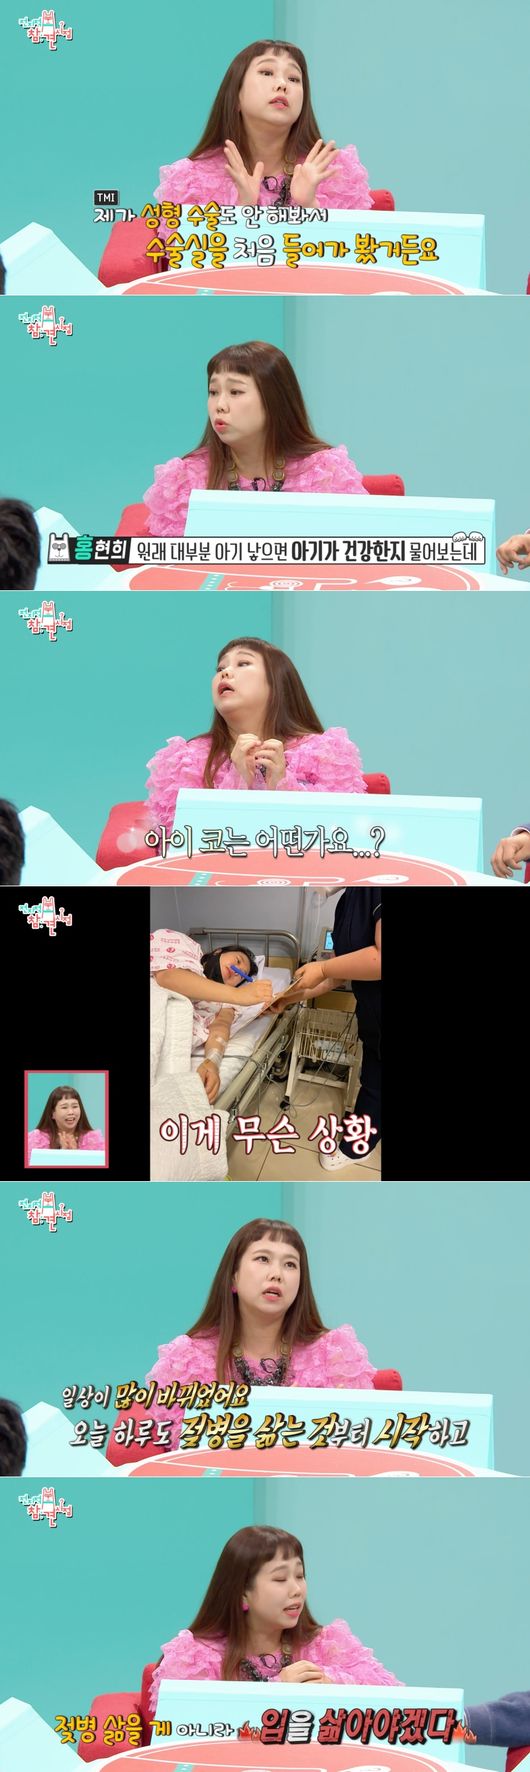 Hey there you are!. Comedian Hong Hyon-hee made a comeback as a stupid mother on Point of Omniscient Interfere.Hong Hyon-hee returned to MBC entertainment program Point of Omniscient Interfere which was broadcast on the 24th.On May 5, he made a comeback to Point of Omniscient Interfere in 50 days after a healthy son was Child Birth.MC Jun Hyun-moo, Song Eun-yi, Yang Se-hyeong and other comedian colleagues and members of Point of Omniscient Interfere applauded Youre here and Youre here and welcomed Hong Hyon-hee.Yang Se-hyeong said, The original plan was to return after three months, four months, but I returned in 50 days of Child Birth.Hong Hyon-hee said, I came to be a good body first, and I know my body best. He prided himself on recovering his health quickly after Child Birth.However, he responded that he did not feel Danger about the broadcast gap during the break, saying, After the Child Birth, he could not get up and then he came out to Point of Omniscient Interfere.I did not know who?! I woke up while I was standing up.He added, Is it because Myeong-seop is a friend who has been in the room with me?Jun Hyun-moo acknowledged,  (Mr. Cho Myung-seop) went to BTS dance, and Yang Se-hyeong also helped him to play a great role.Hong Hyon-hee also revealed a vivid Child Birth review of the curious gaze around him.I did not even do plastic surgery, so I first went into the operating room with Child Birth. I was anesthetized and lay down and the baby came out in three minutes.I went in at 10 oclock and came out at 10:03, he added, adding to the surprise.Especially, he said, Most of the time, when you have a baby, you are healthy? , Finger, five toes? He emphasized that he was concerned about his childs appearance.The members of the Point of Omniscient Interfere, who saw the photo of the Sung-Byeol, admired the unnatural nose and small face clown.Hong Hyon-hee said, My nose is still okay. My clown is still okay.In the meantime, even though Child Birth is imminent, Hong Hyon-hees Superstar aspect was revealed and made a laugh.A photo of Hong Hyon-hee, who lay down in the room and signed the nurses, was released. Song Eun-yi said, Is this picture? The writers were humming in the hallway.I asked for a baby photo and I gave it to him (Hong Hyon-hee). He even added, Did you even wear lip balm in the middle of this?Hong Hyon-hee was embarrassed, but said, I gave Signs to the nurses to appeal that I was a superstar.I went to the foundation to ask for a photo, he confessed.As such, the bone-gman Hong Hyon-hee was also living the life of Mom after Child Birth; he said: Everyday has changed a lot.Its a morning schedule, and I started with boiling a bottle. Im disinfecting my baby because its a newborn baby.But one day I thought I was the closest to the child and I had to do my brushing right. I thought I should boil my mouth, not the bottle.I have to breathe with my child. Song Eun-yi added, Brushing is going to be a applause, but it is a big thing. In the former Child Birth Point of Omniscient Interfere, he added laughter by mentioning that he showed a free life that does not care about cleanliness as well as brushing.MBC is provided.